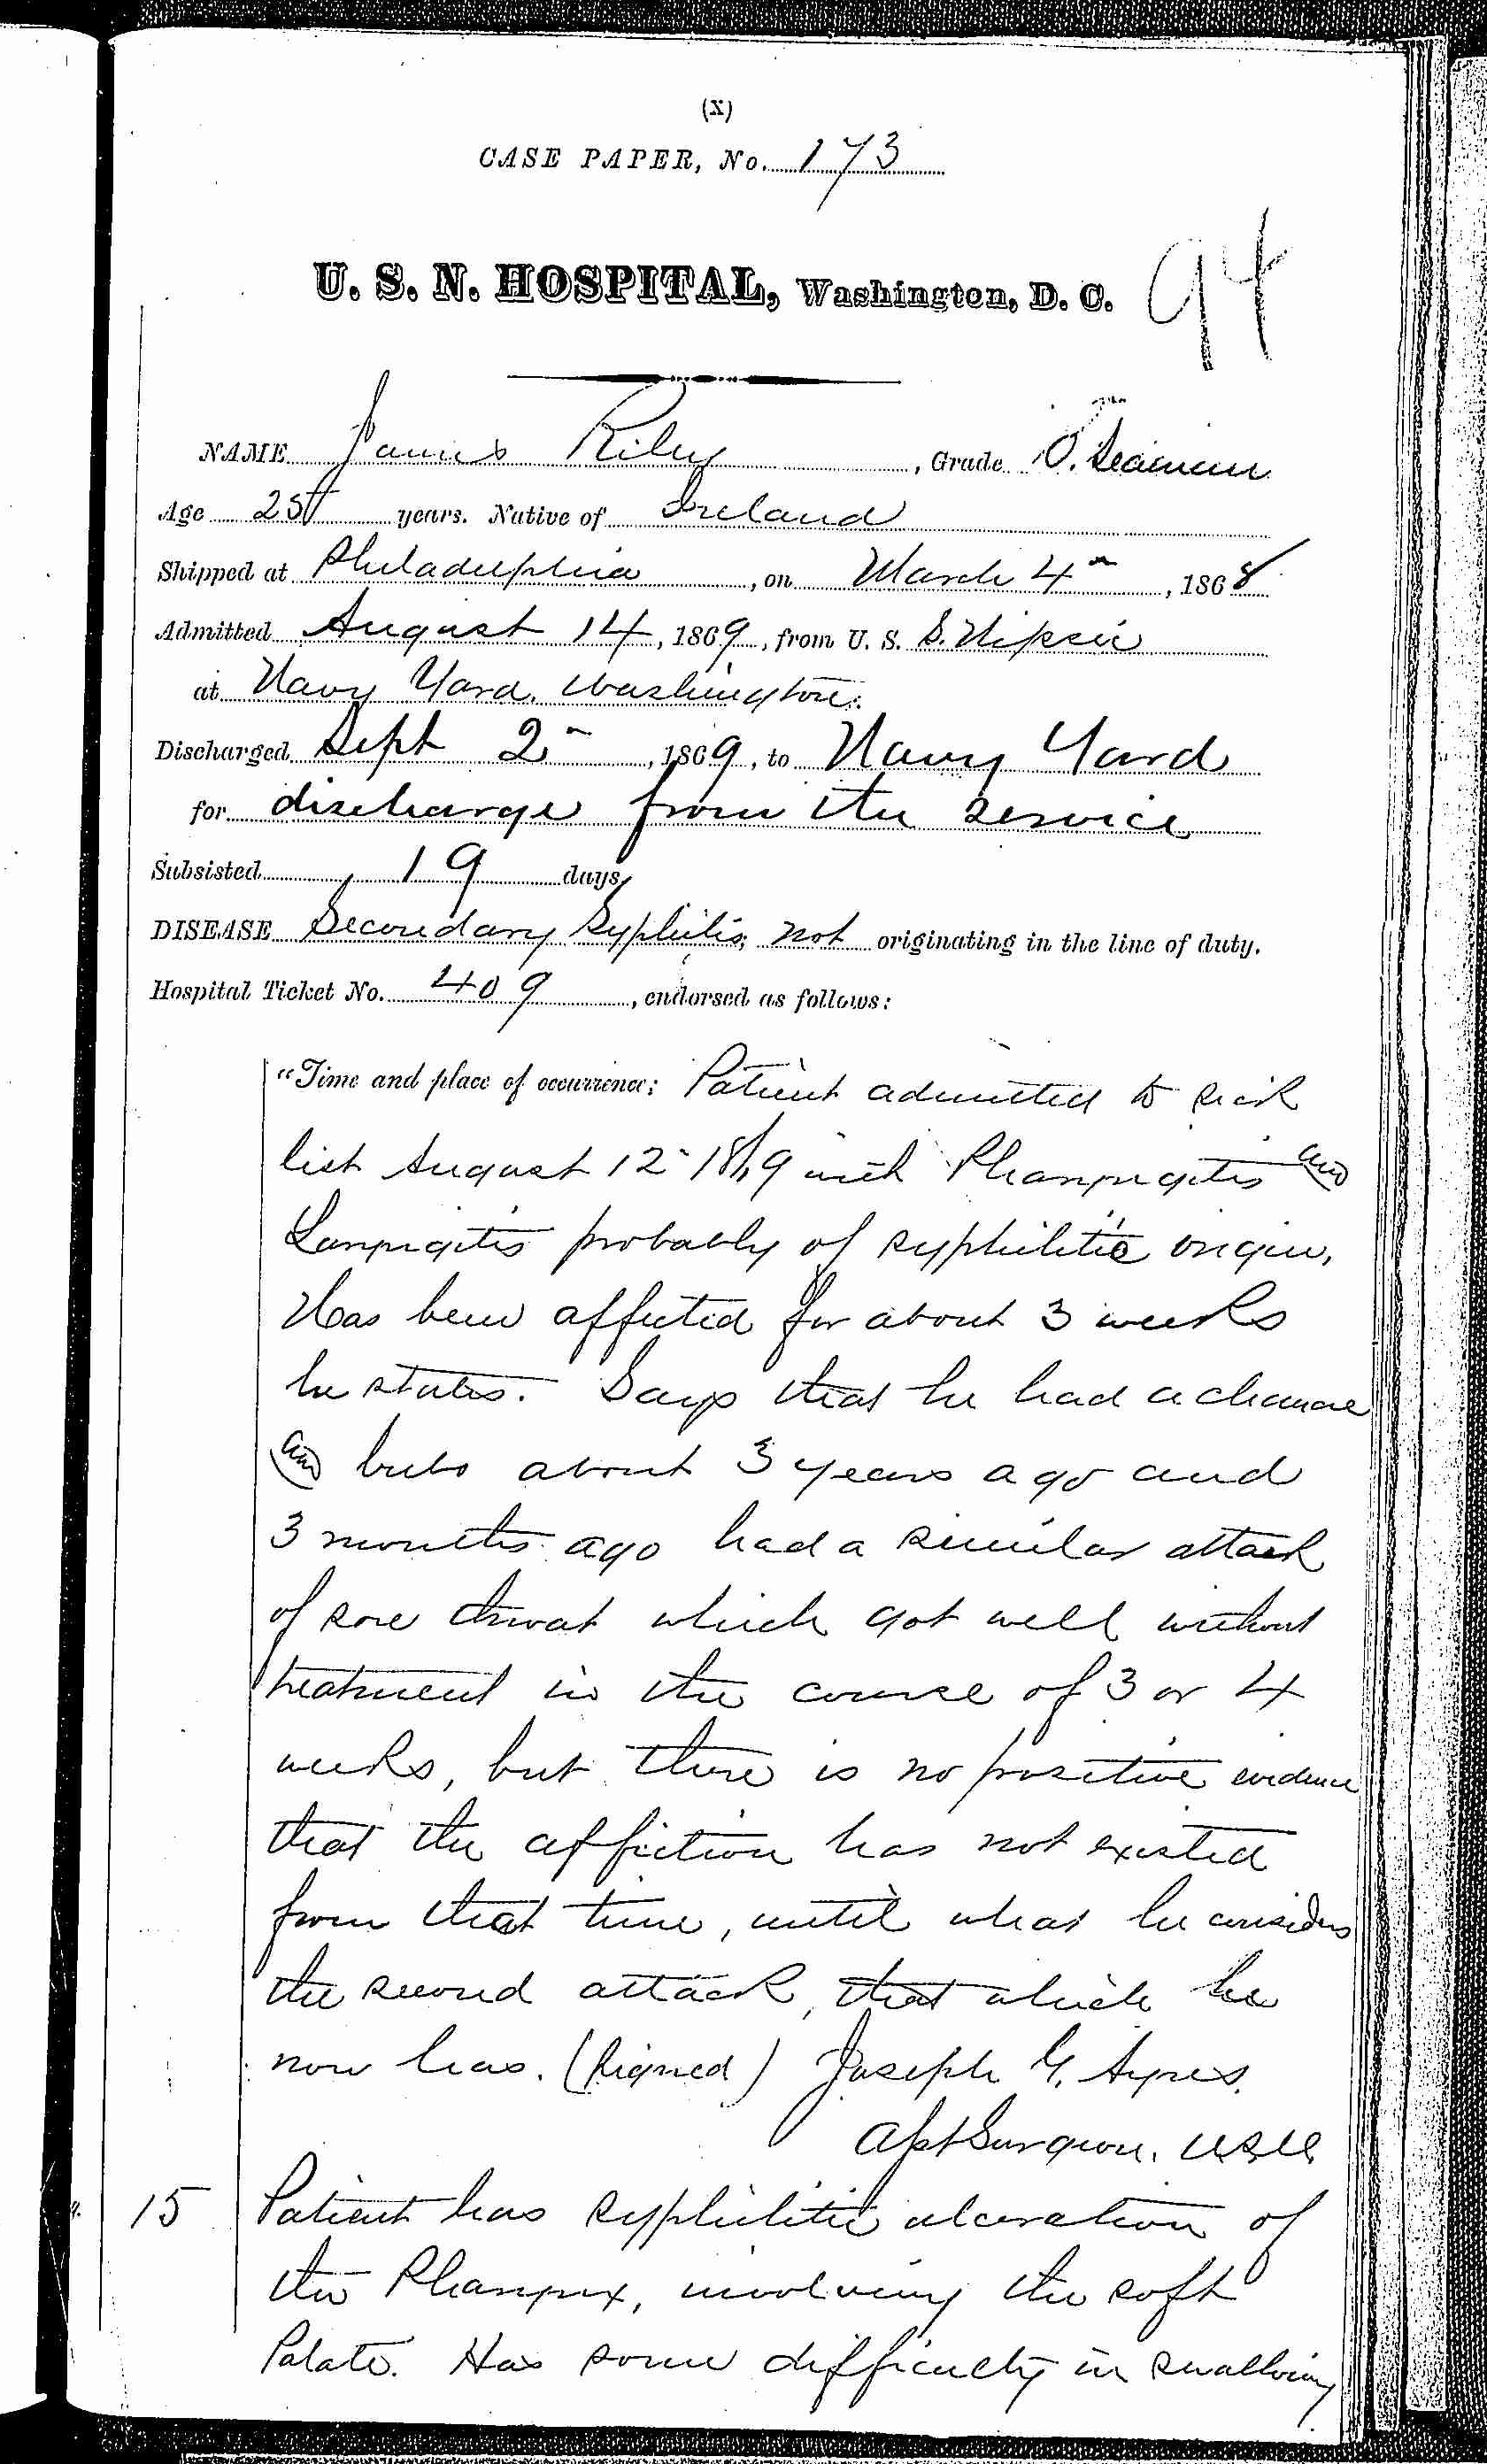 Entry for James Riley (page 1 of 3) in the log Hospital Tickets and Case Papers - Naval Hospital - Washington, D.C. - 1868-69